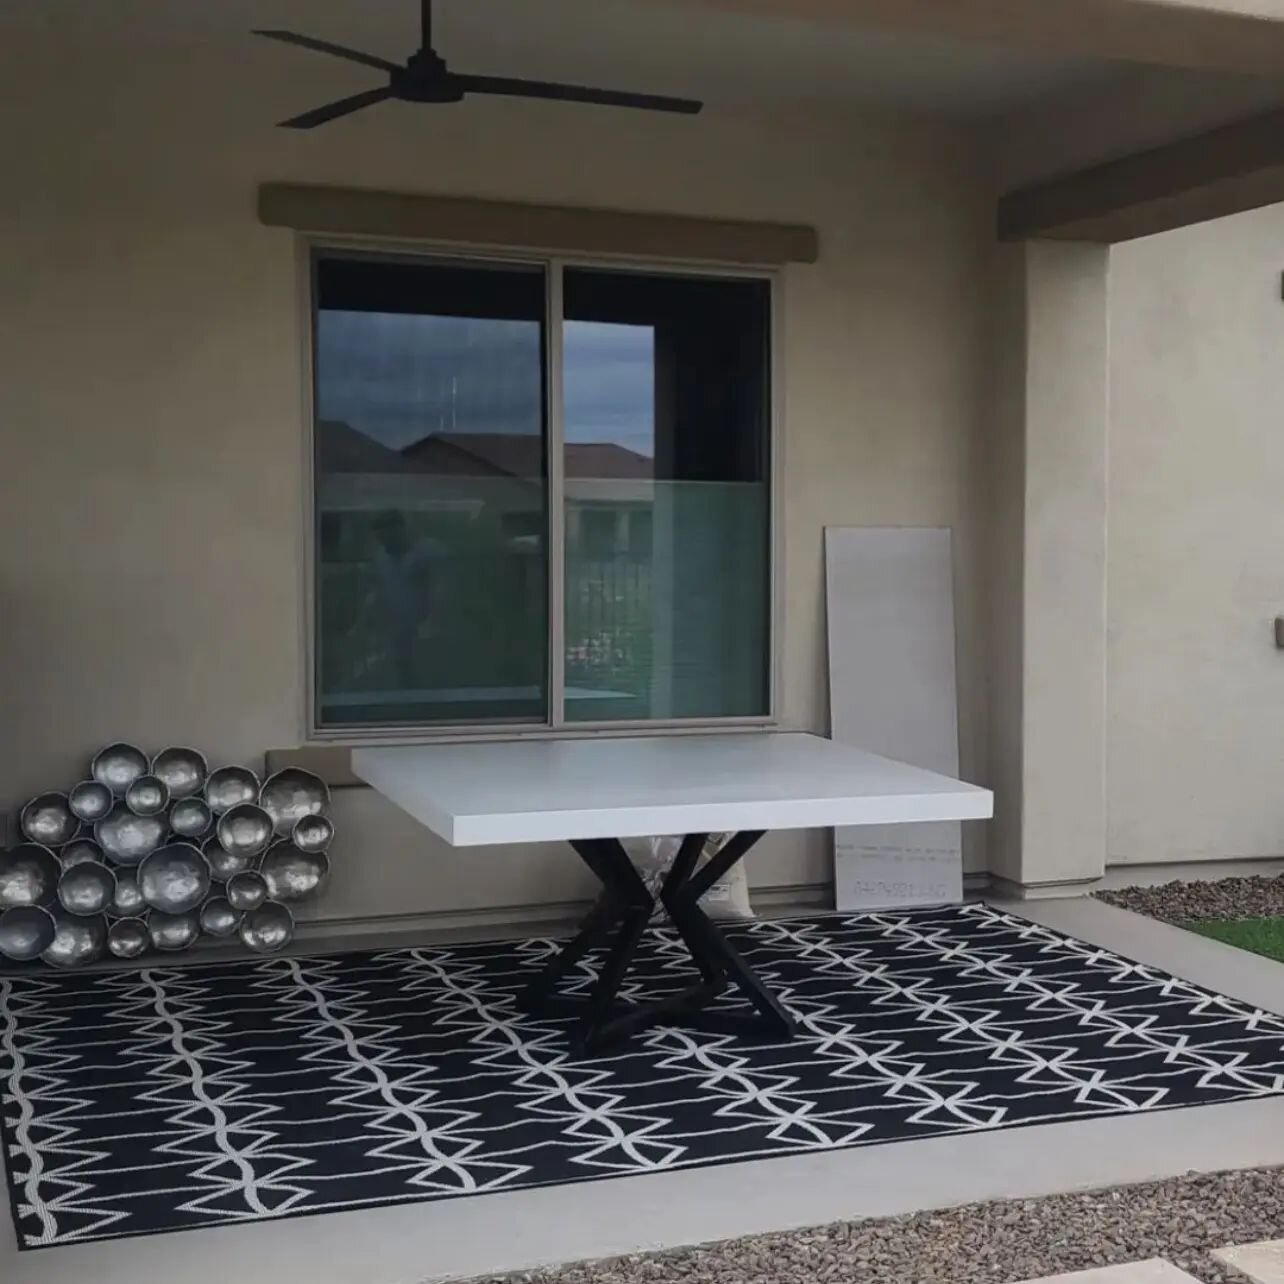 This top is a 60x60&quot; with an hourglass base all made in the Freedom Factory!
Seamless addition to our clients vision in their backyard.

#concretecountertops #concretefurniture #interiordesign #customcounters #phoenix #arizona #freedomconcrete #